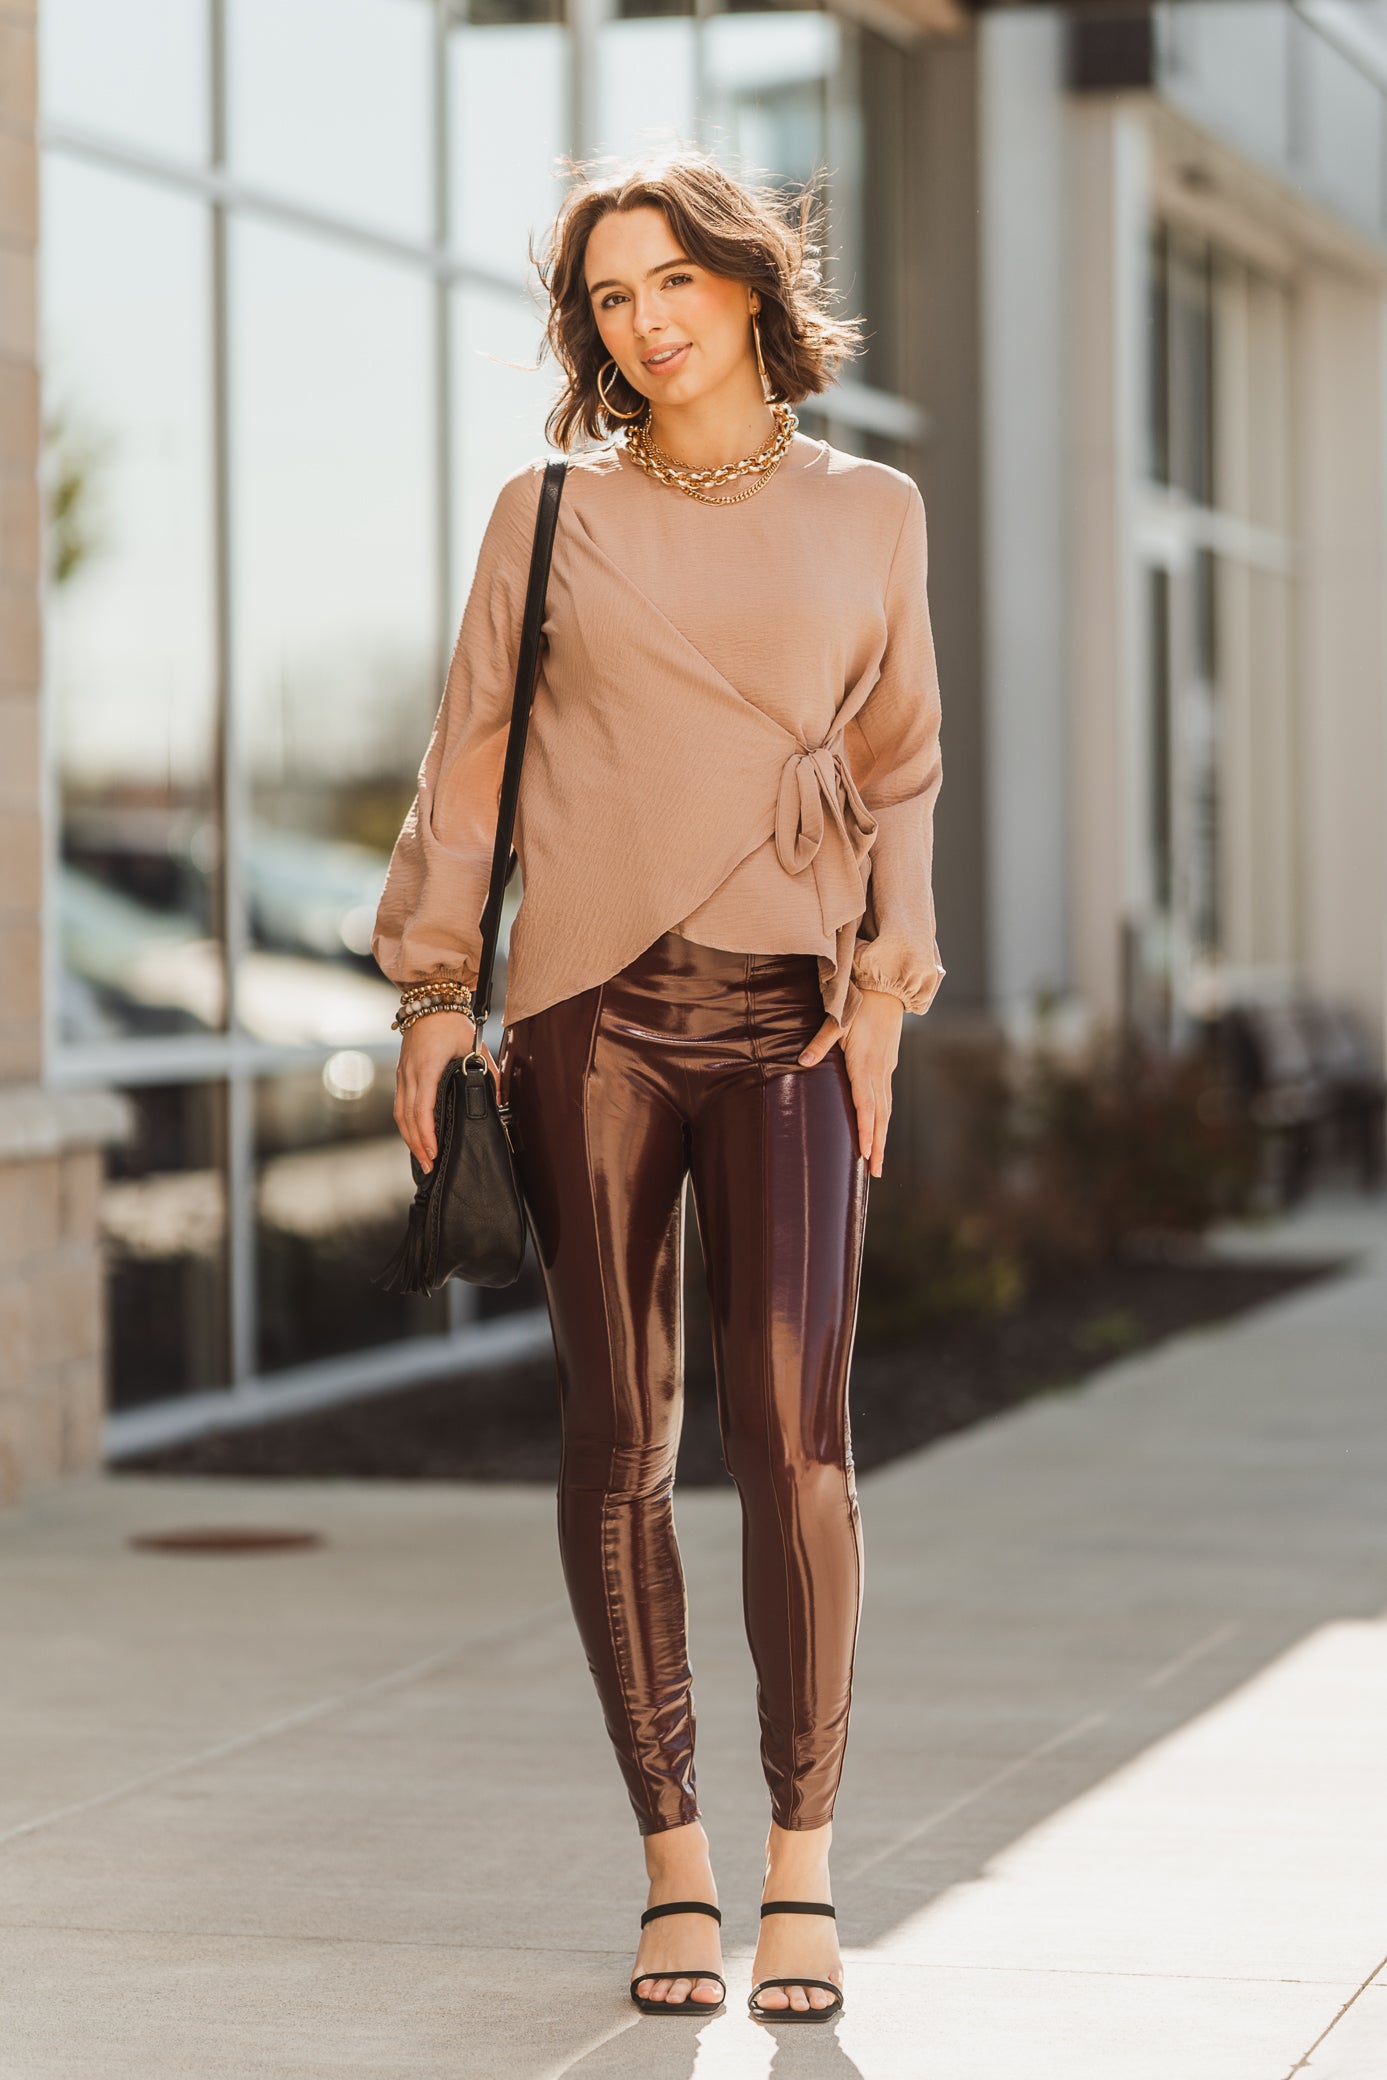 spanx and tights - Gem